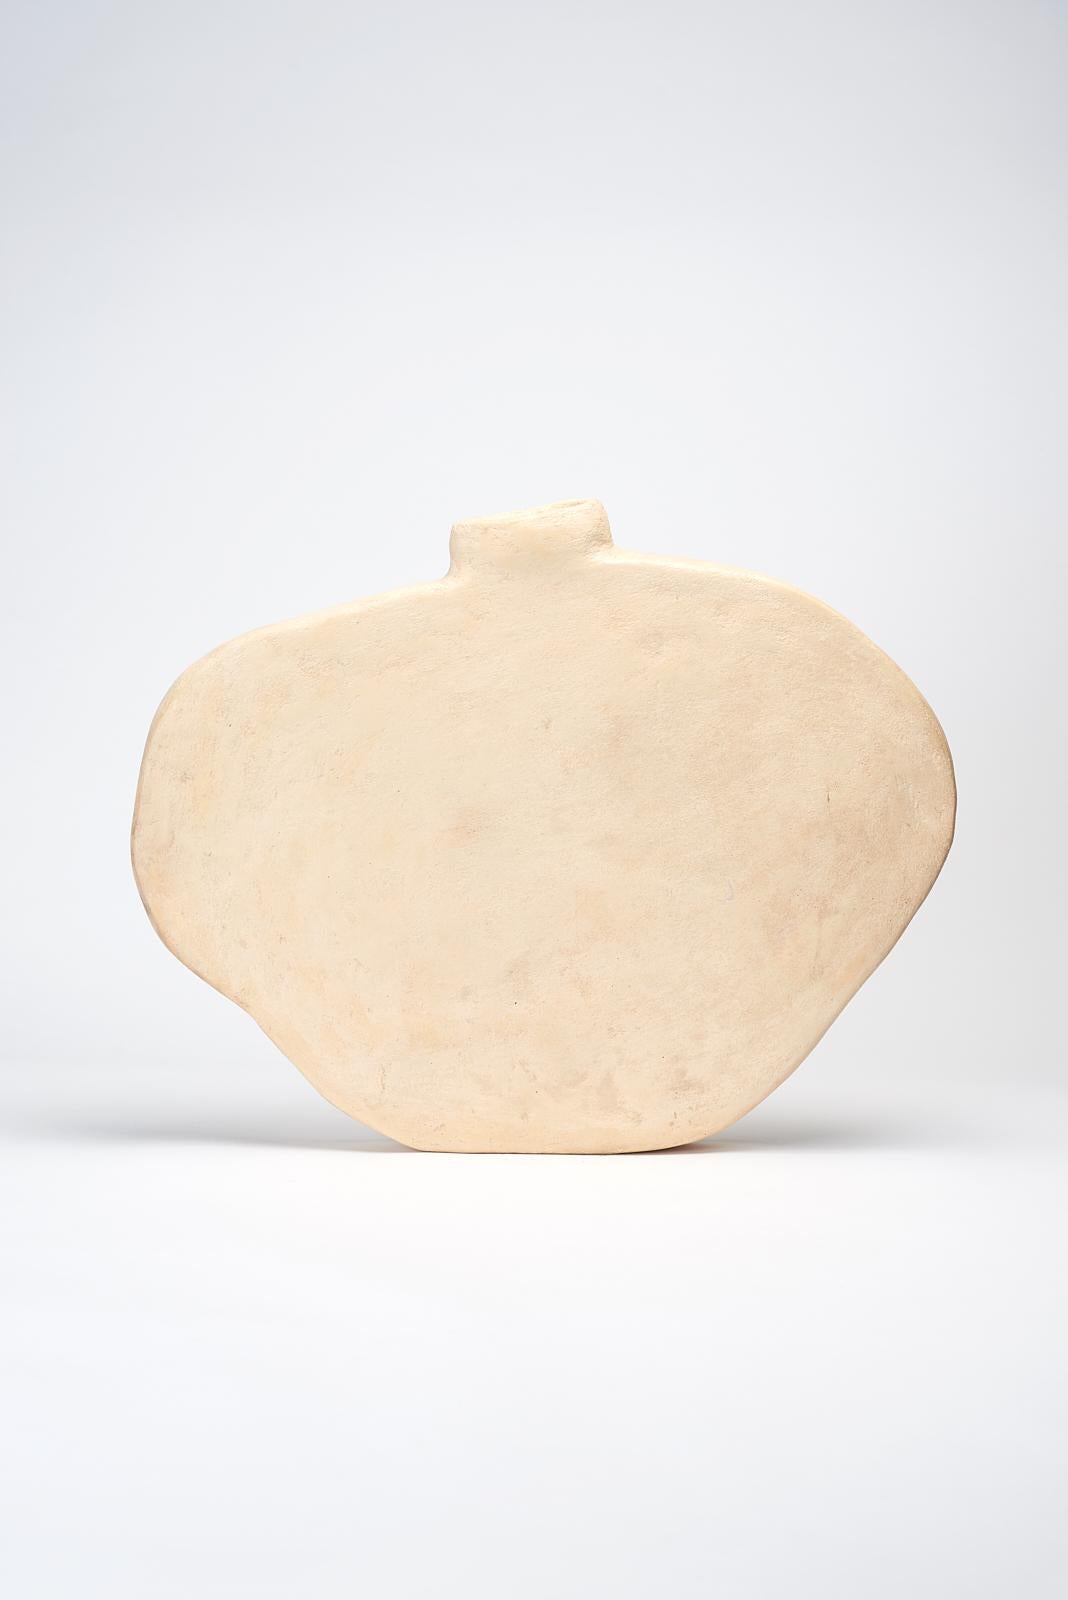 Blanco Vase by Willem Van Hooff
Core Vessel Series
Dimensions: W 62 x D 10 x H 53 cm (Dimensions may vary as pieces are hand-made and might present slight variations in sizes)
Materials: Earthenware, Ceramic, Pigments, Glaze

Core is a series of